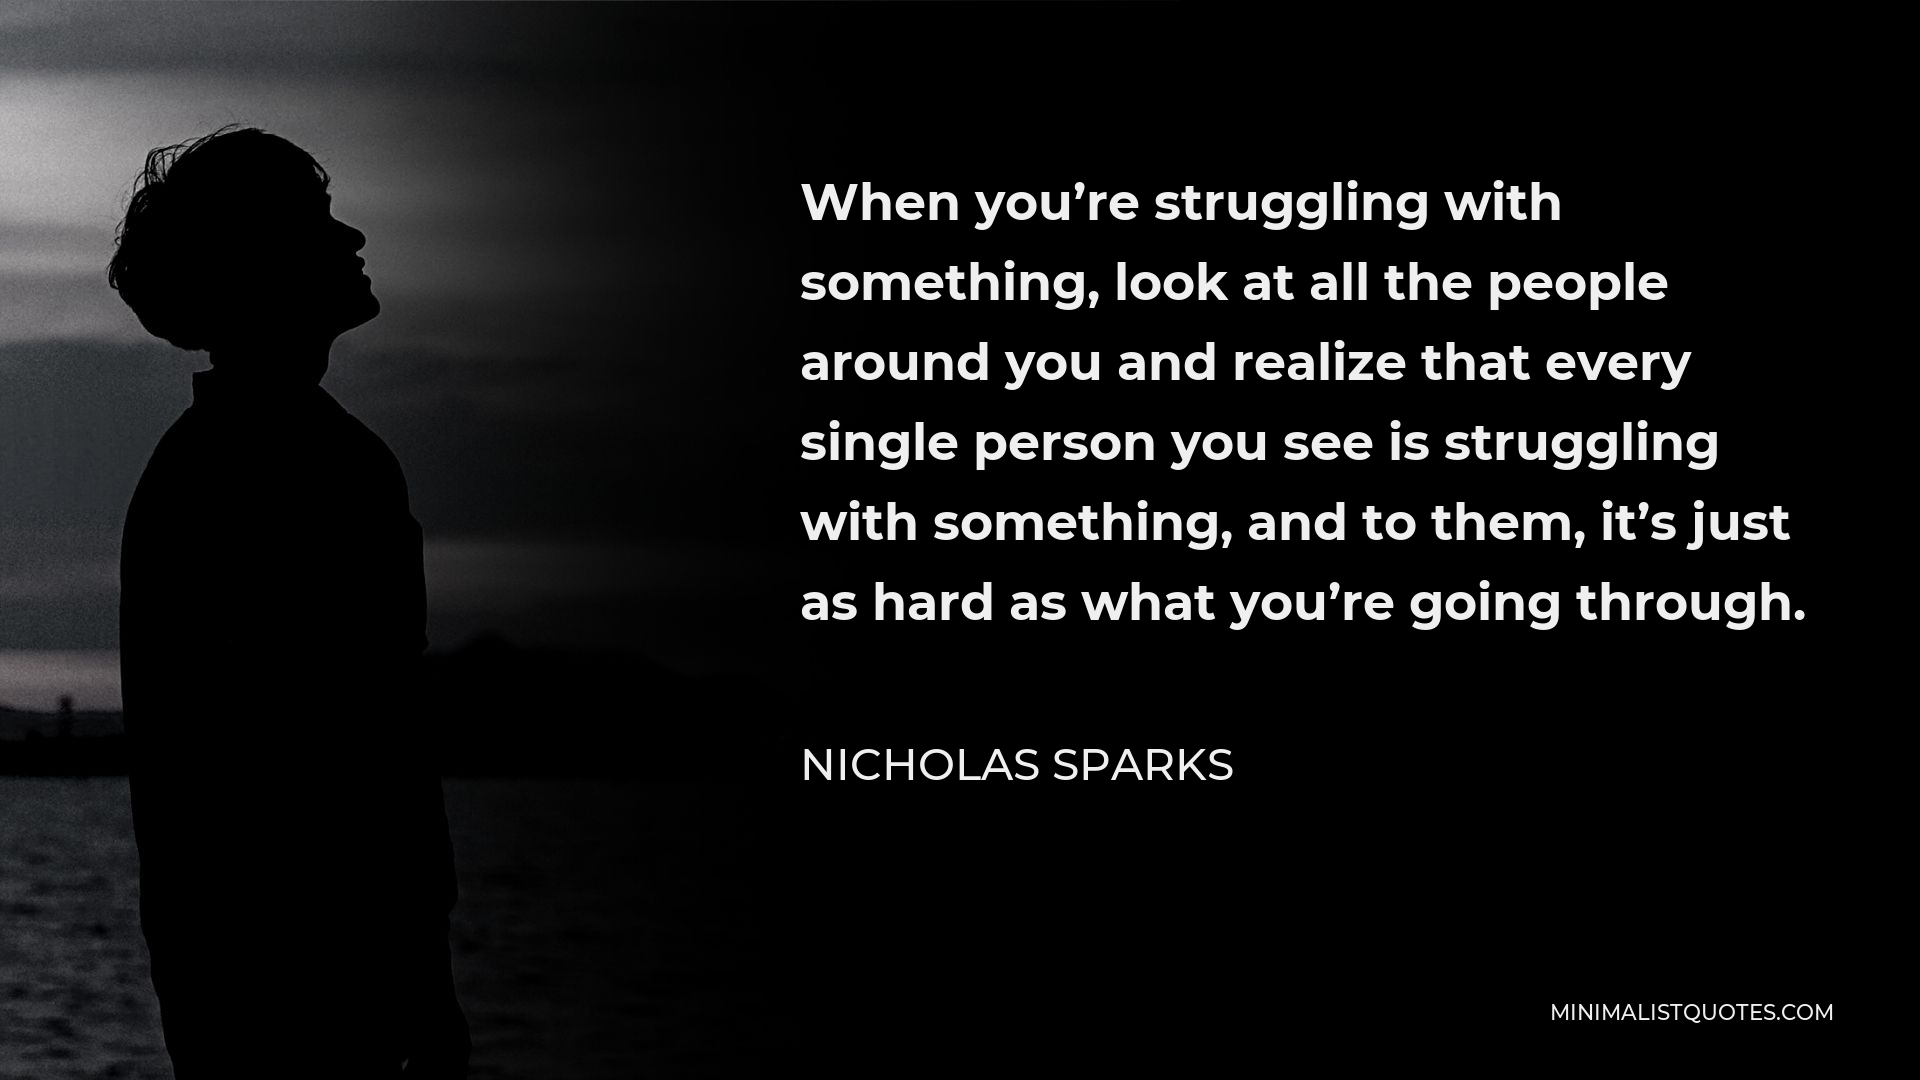 Nicholas Sparks Quote - When you’re struggling with something, look at all the people around you and realize that every single person you see is struggling with something, and to them, it’s just as hard as what you’re going through.